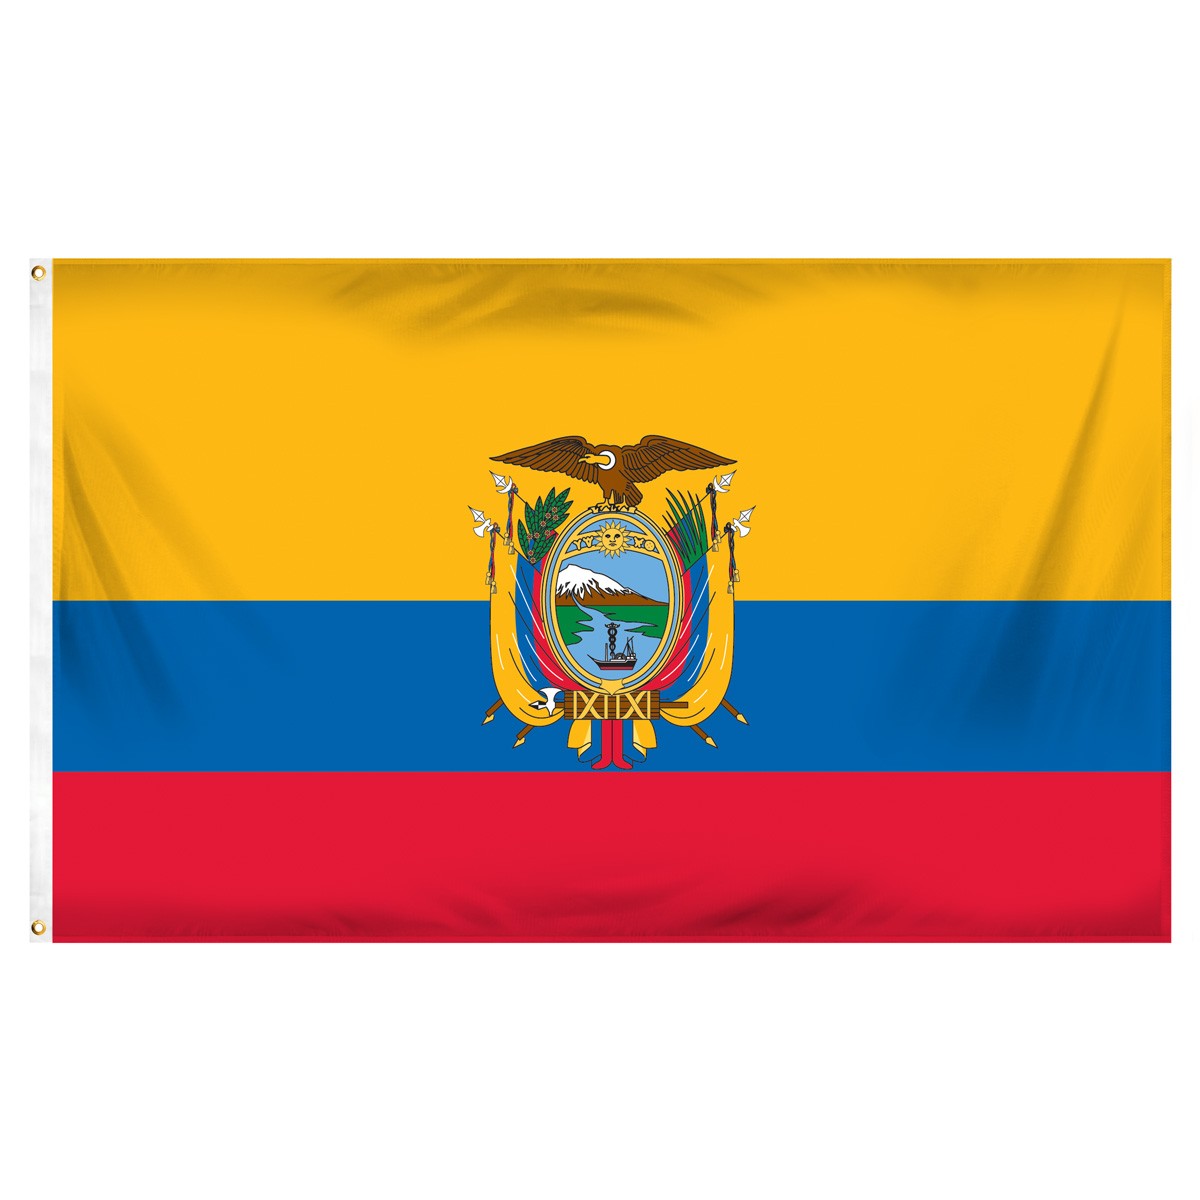 Ecuador Submit Flags and Flags